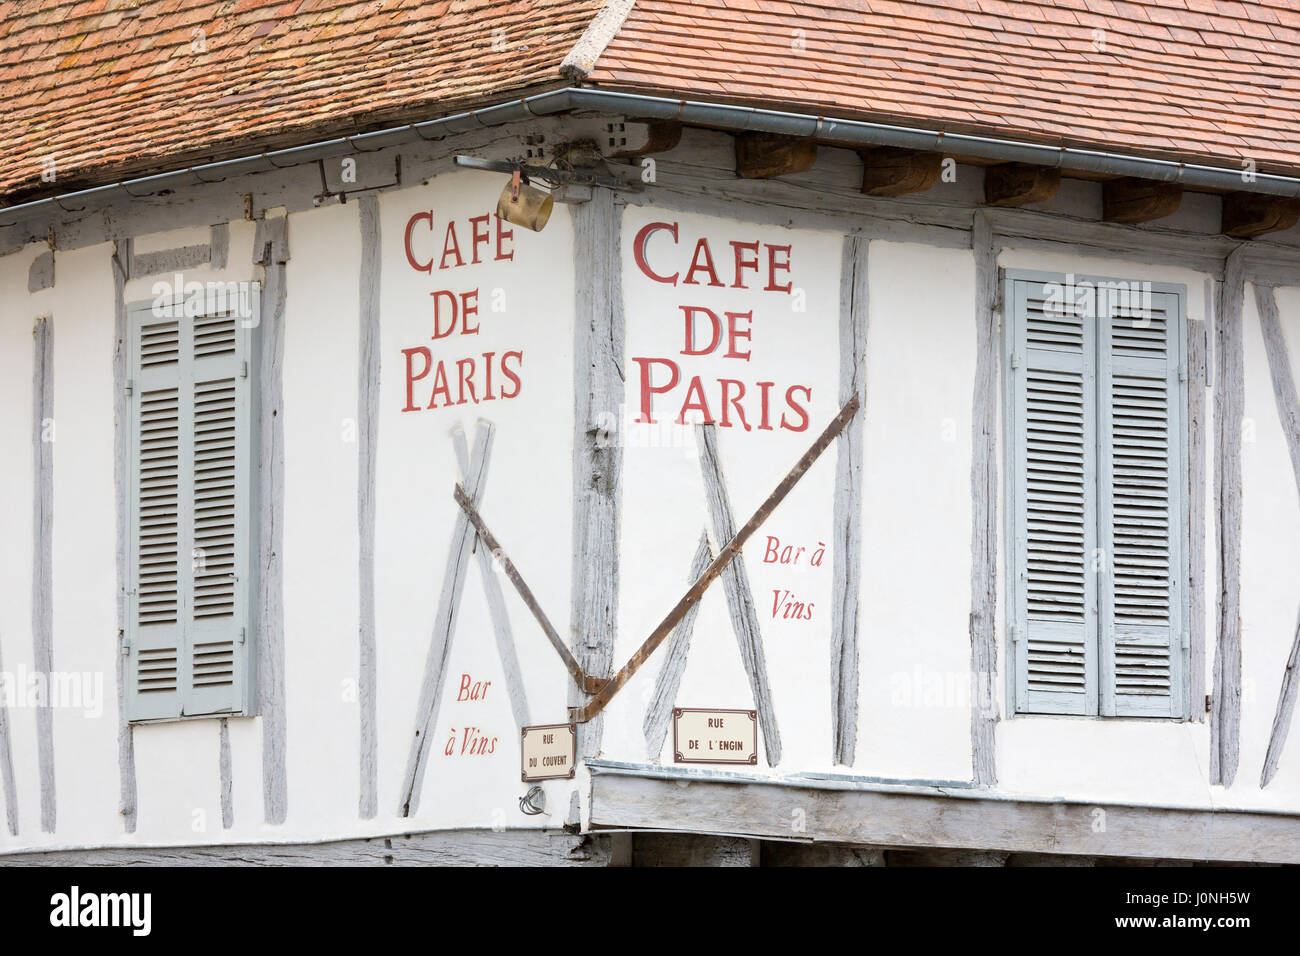 Medieval old architecture and shutters of Cafe de Paris Bar Restaurant  in 13th Century bastide town Eymet in Aquitaine, France Stock Photo